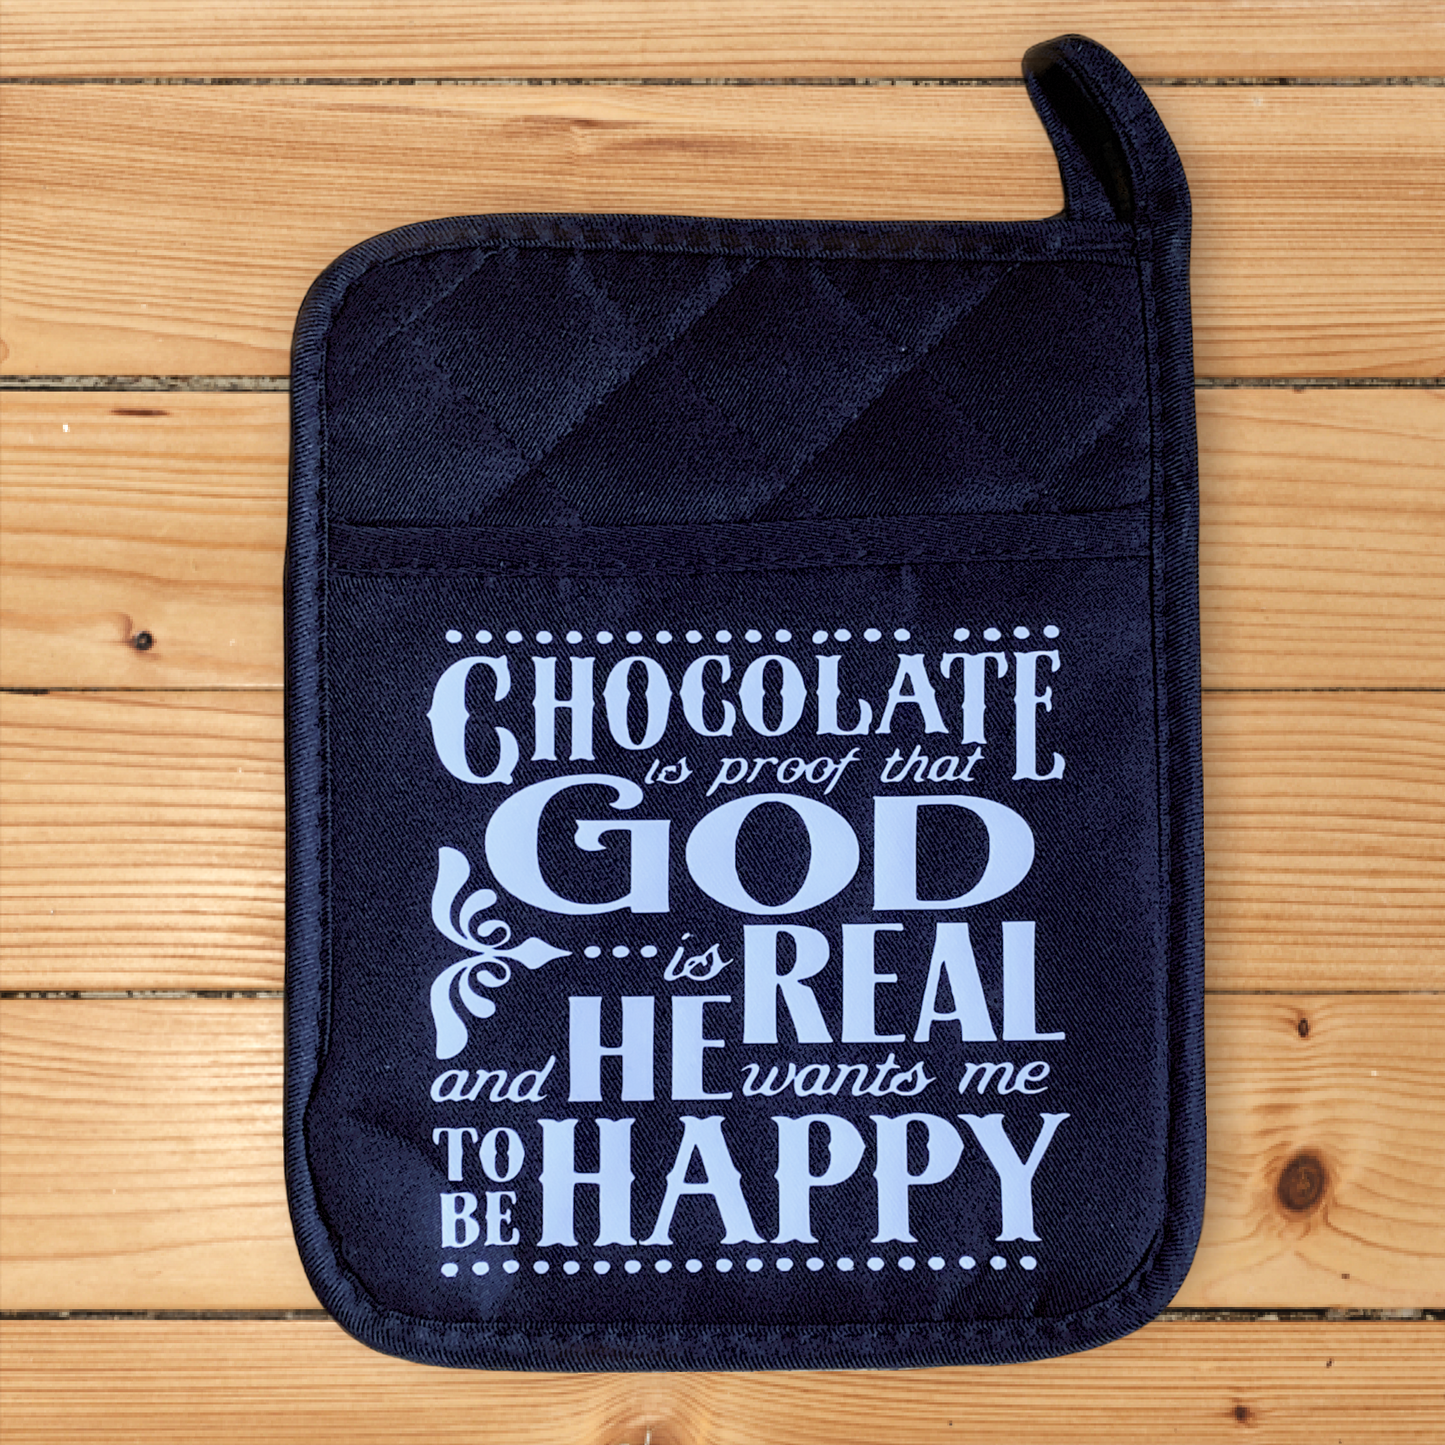 Pot Holders only " Chocolate is proof that God is real and he wants me to be happy" |Mother’s day gift|birthday gift | housewarming gift